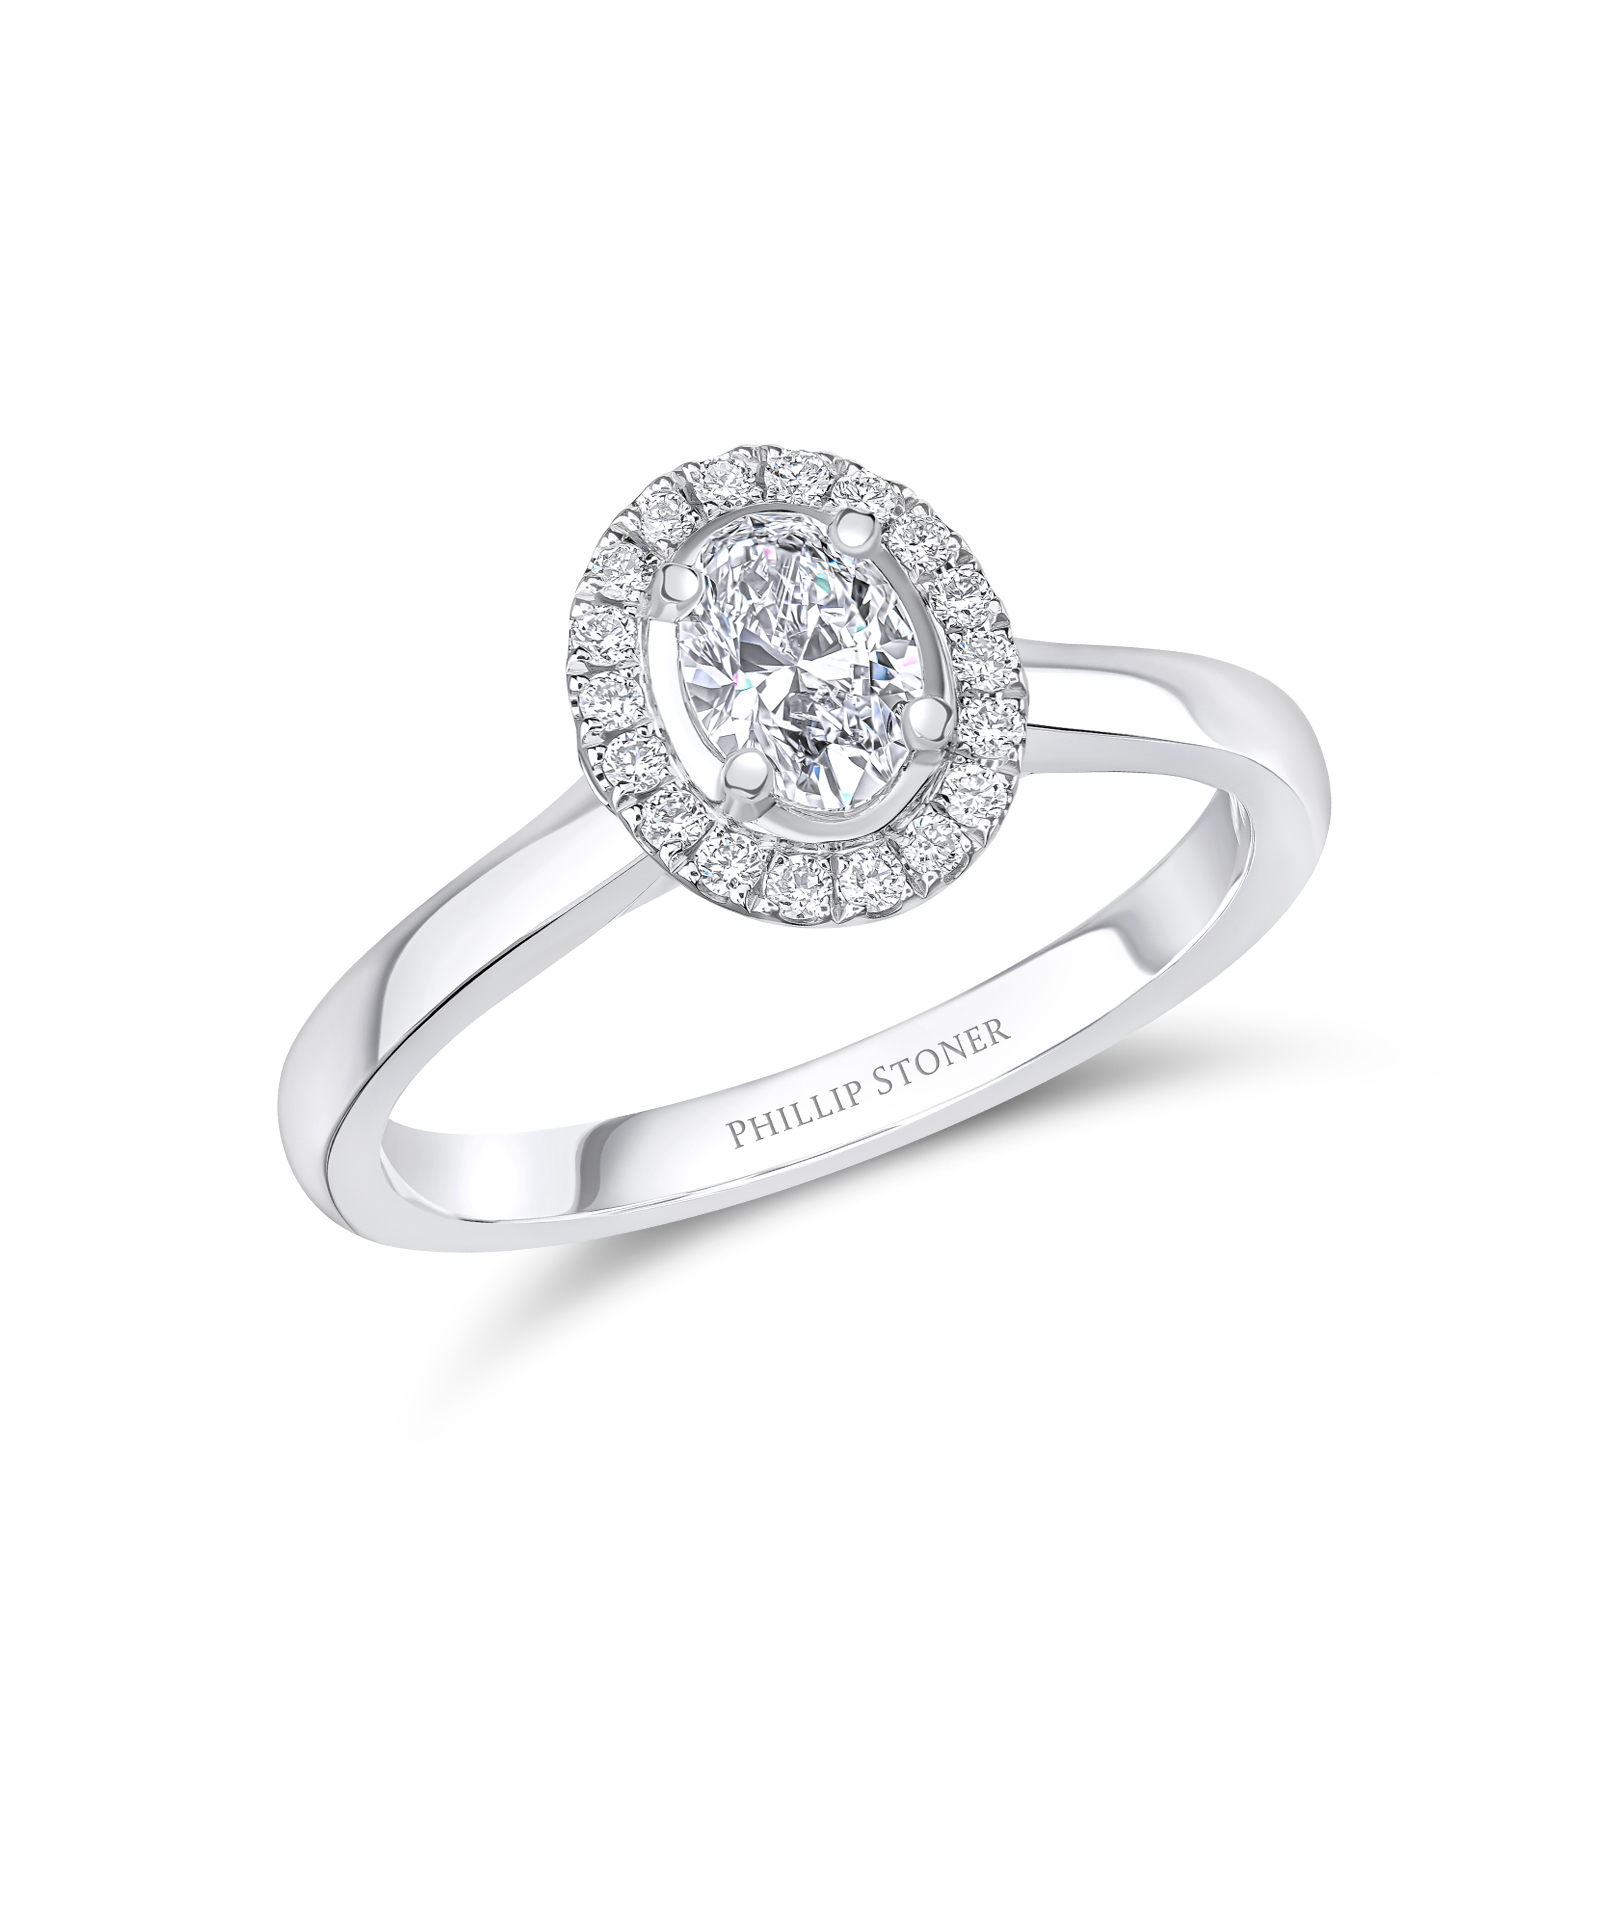 0.30ct Oval Cut Diamond Halo Engagement Ring with Plain Shoulders - Phillip Stoner The Jeweller